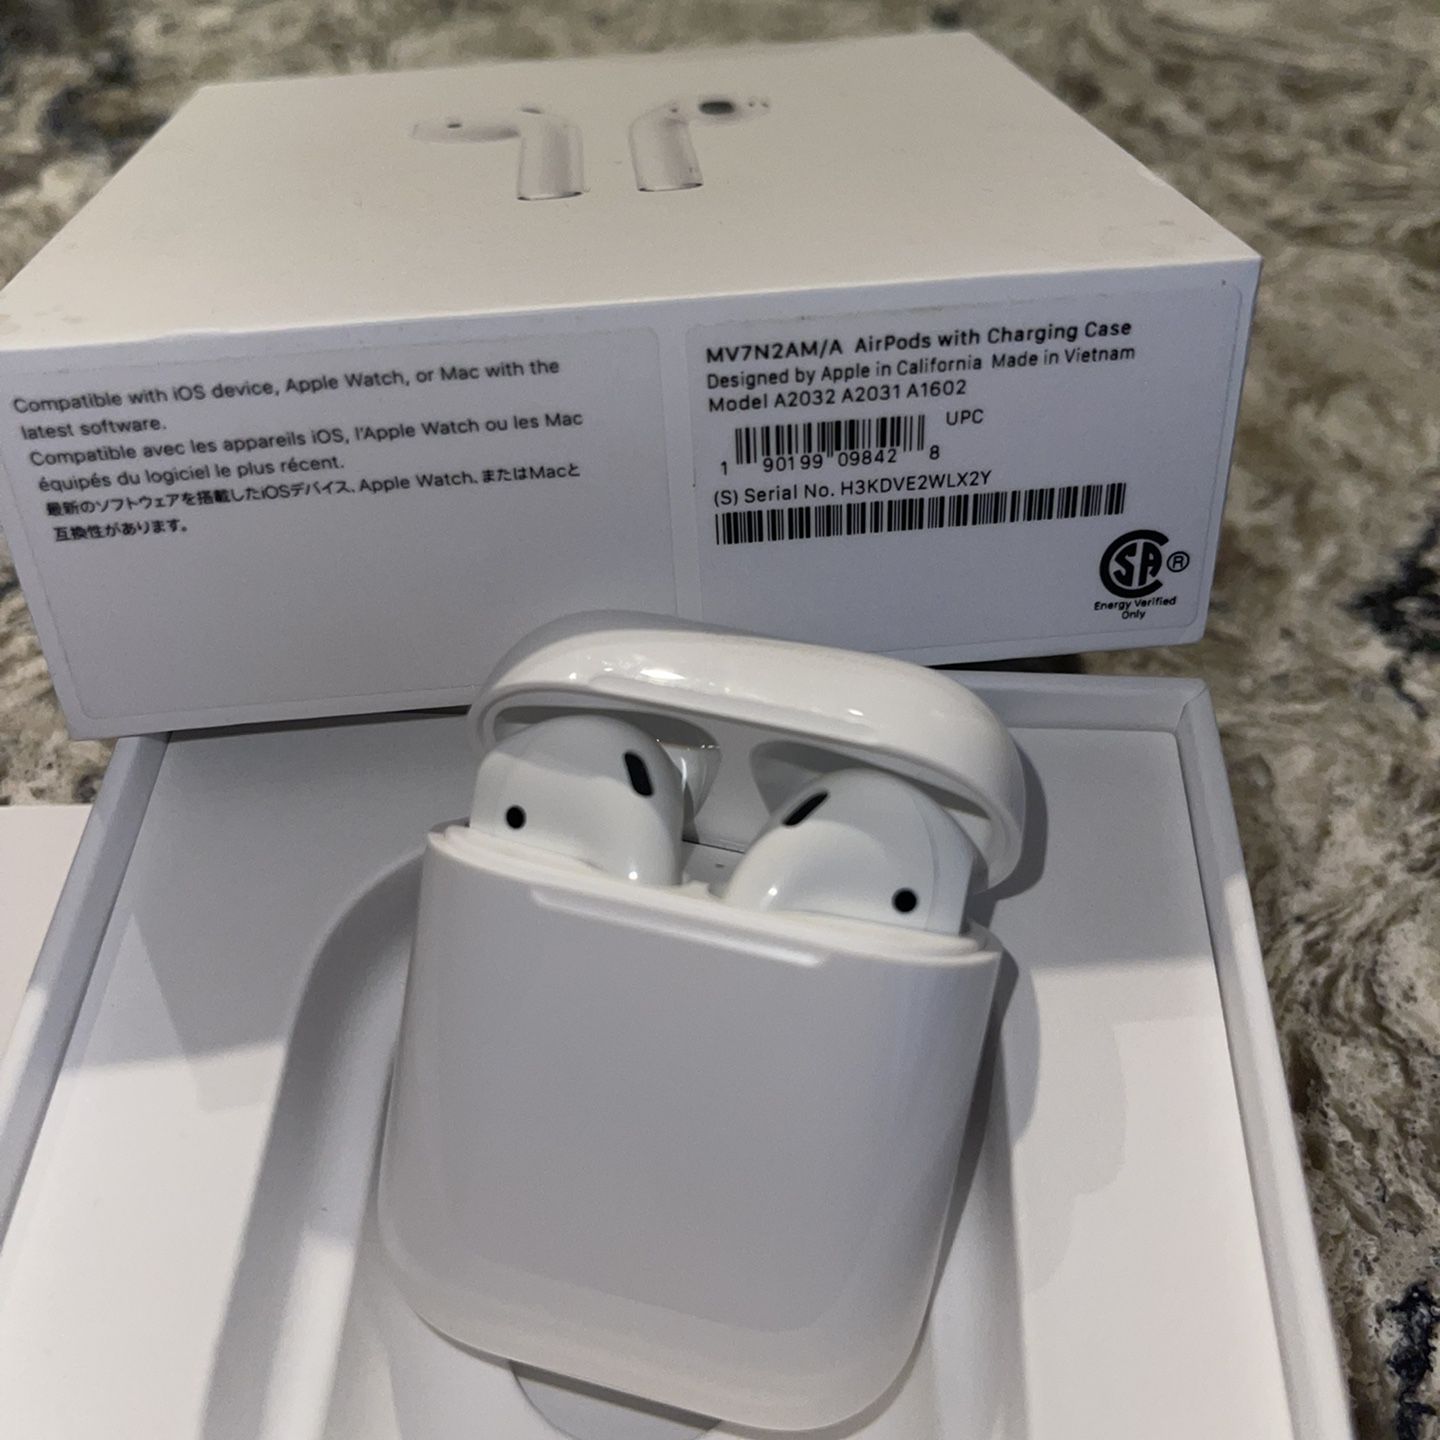 Airpods a2032. AIRPODS a2031. A1602 AIRPODS. A2031 AIRPODS какая. Наушники Apple AIRPODS 2 a2032,a2031,a1602, with Charging Case разъем питания.